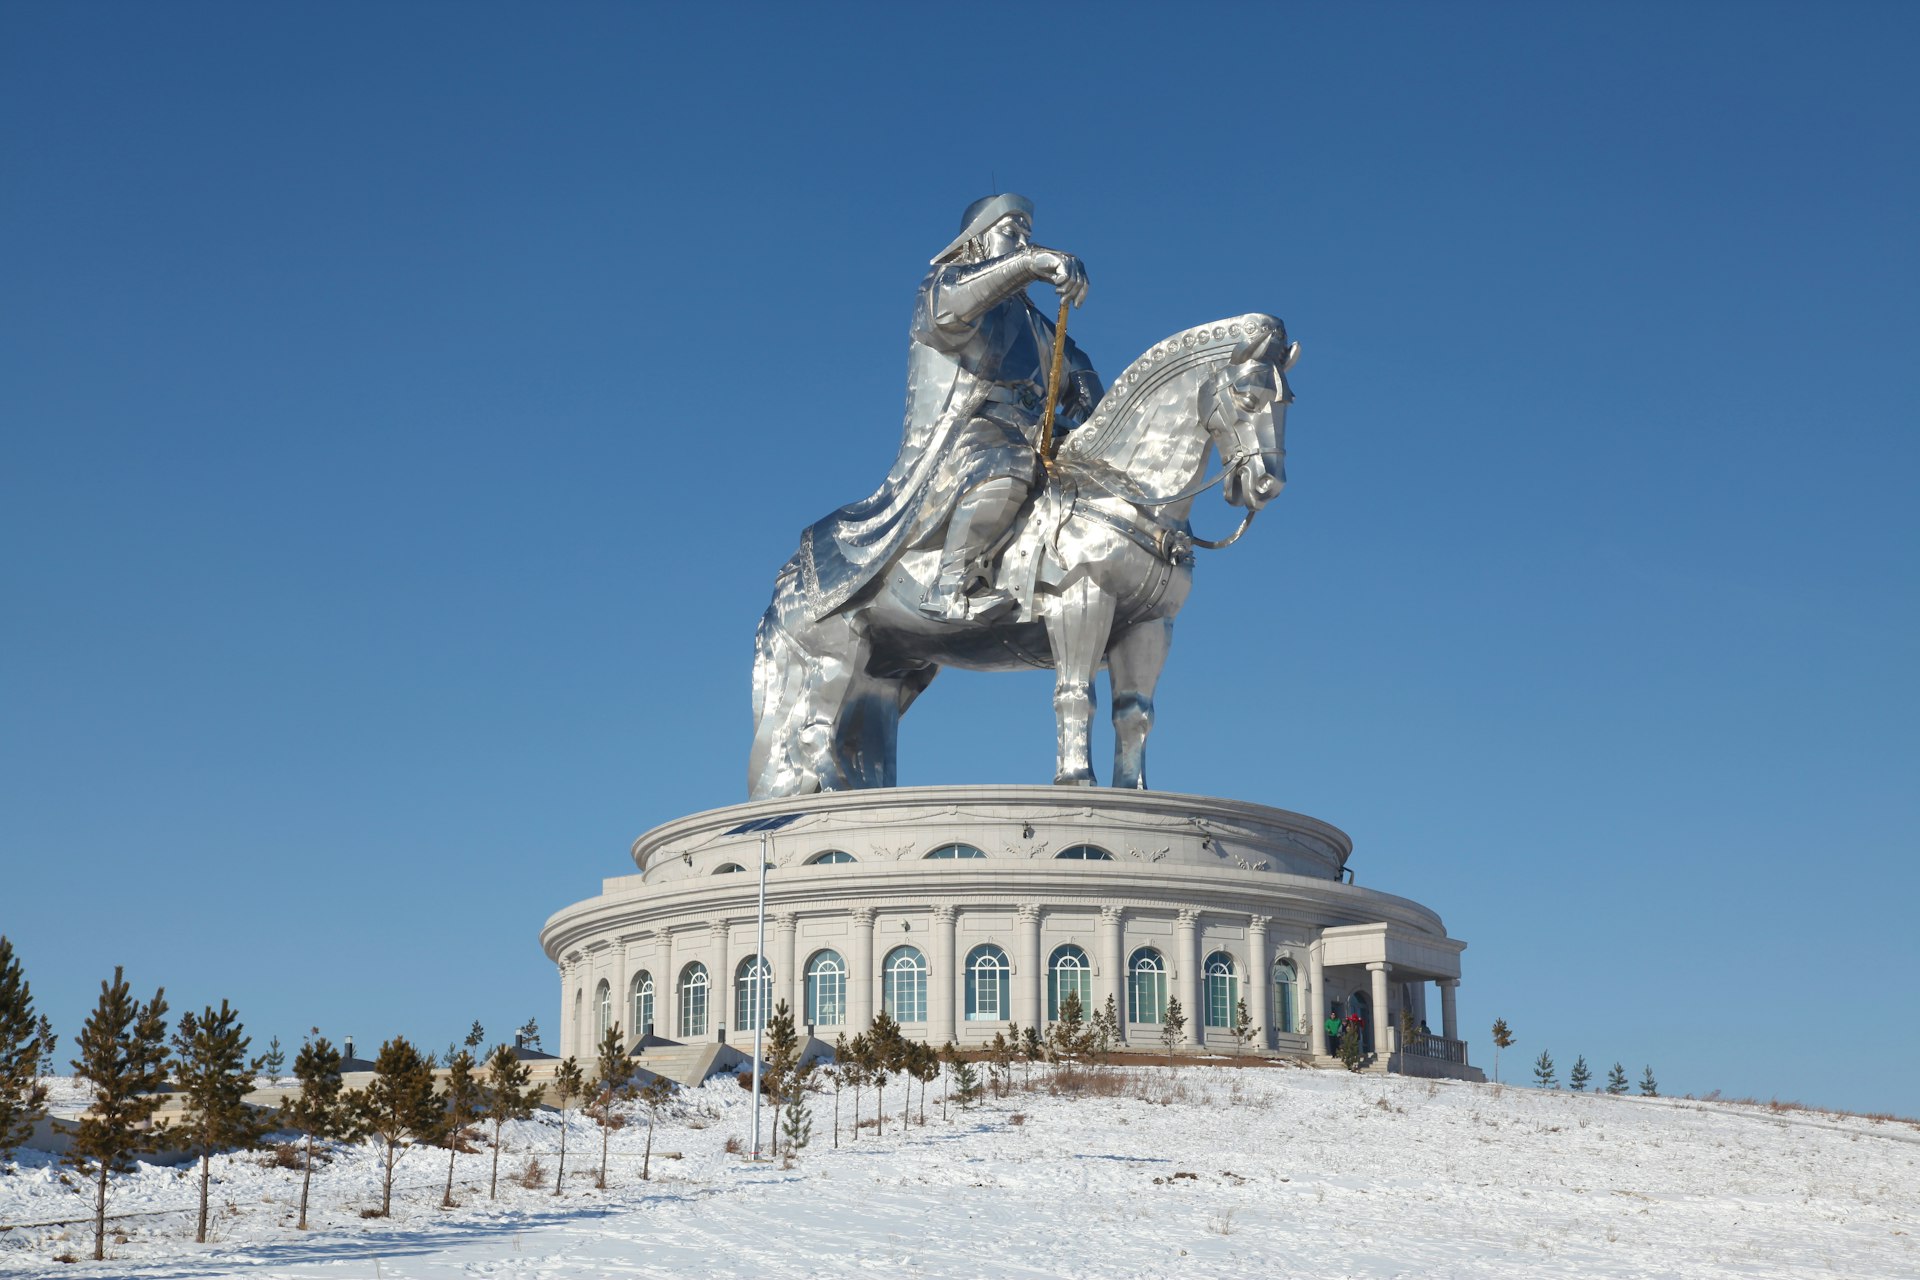 Equestrian statue of Genghis Khan on a sunny winter day, Ulaanbaatar, Mongolia